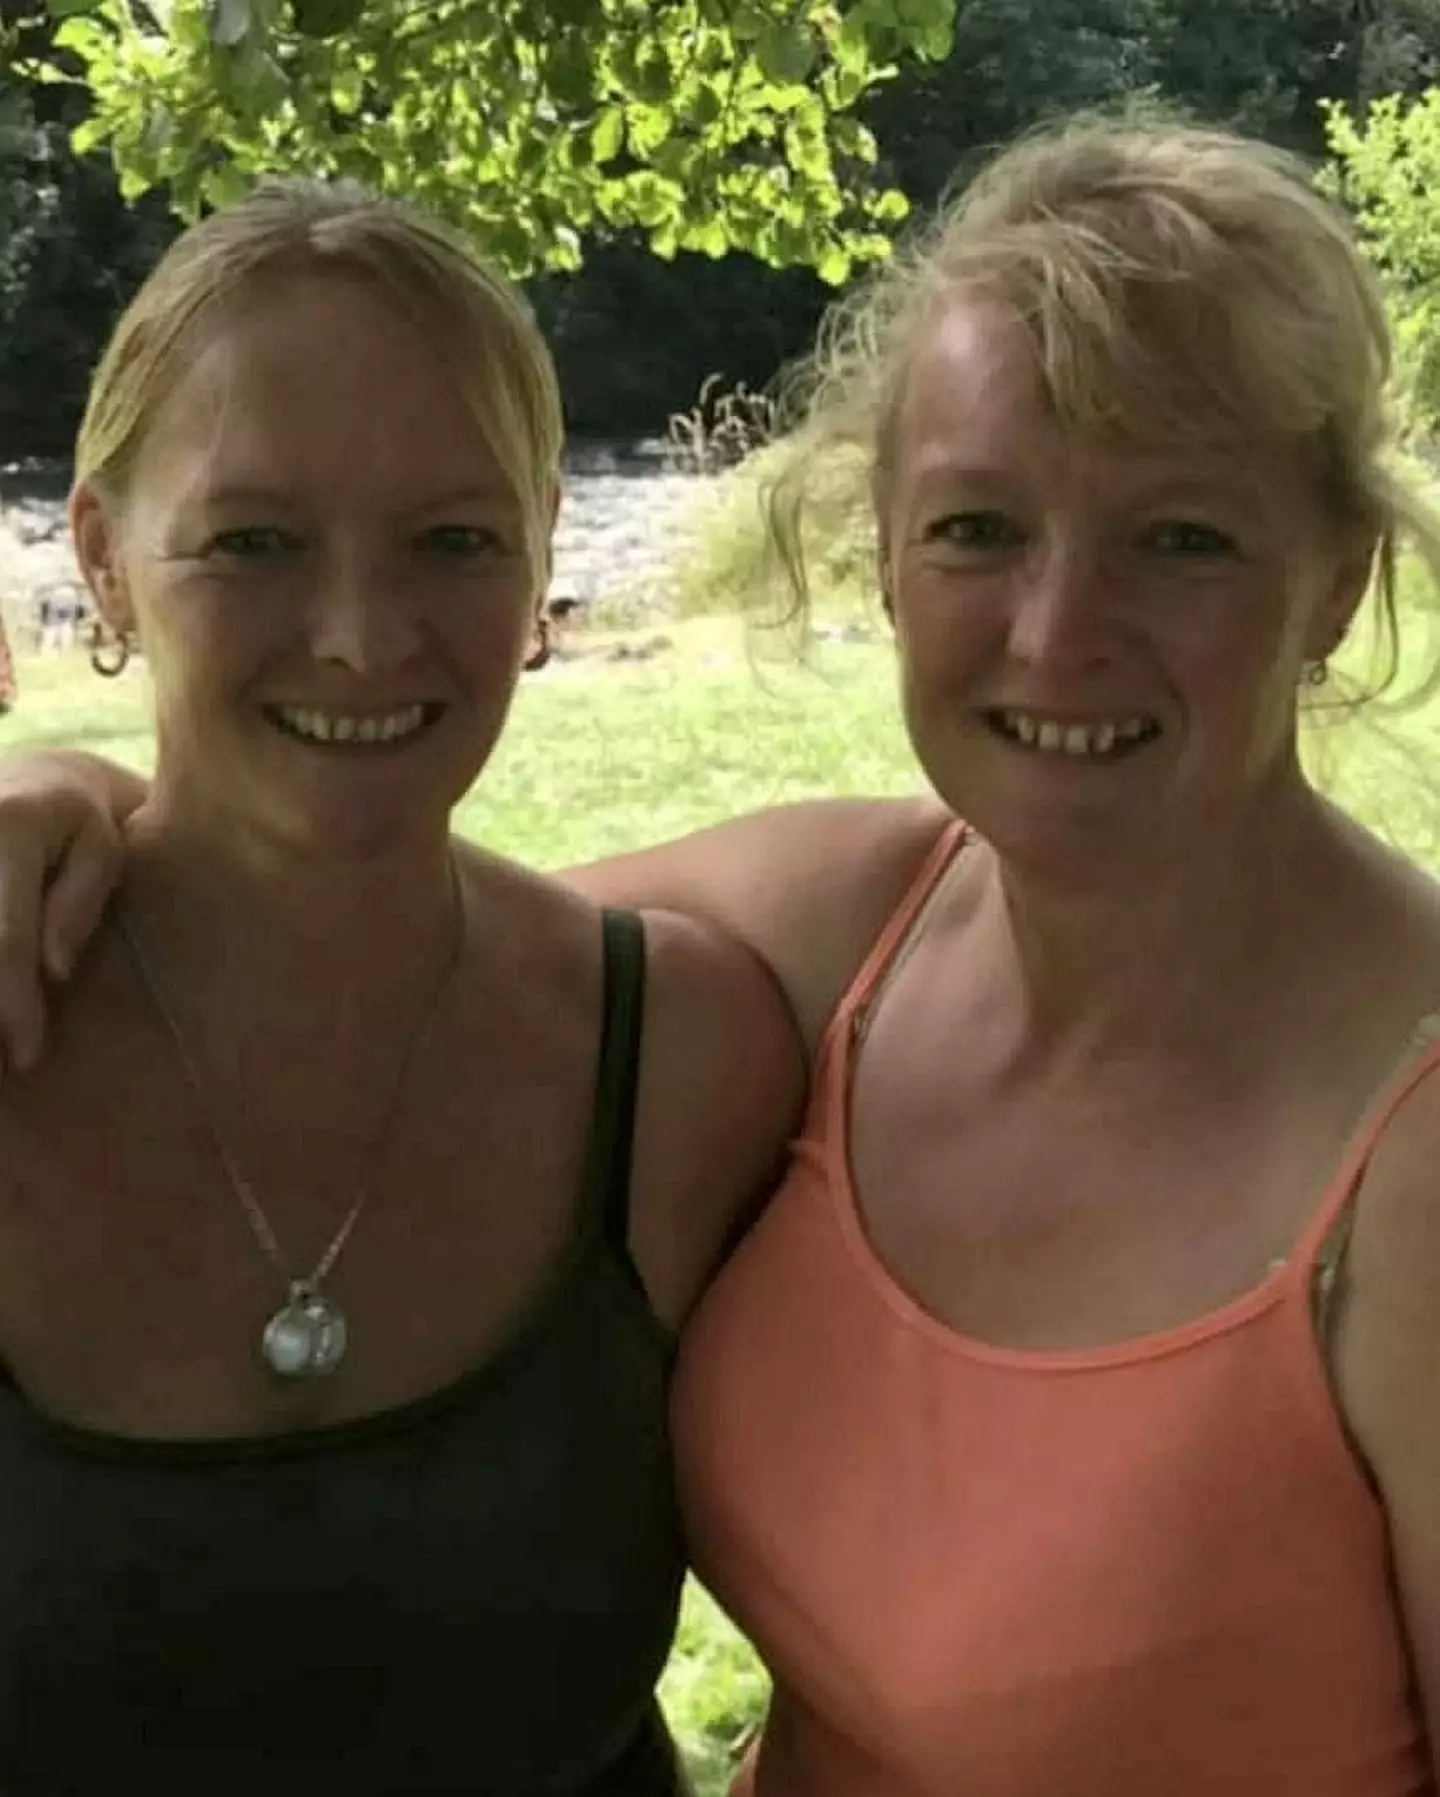 A woman said her painful migraines stopped when her twin sister had her brain tumour removed.